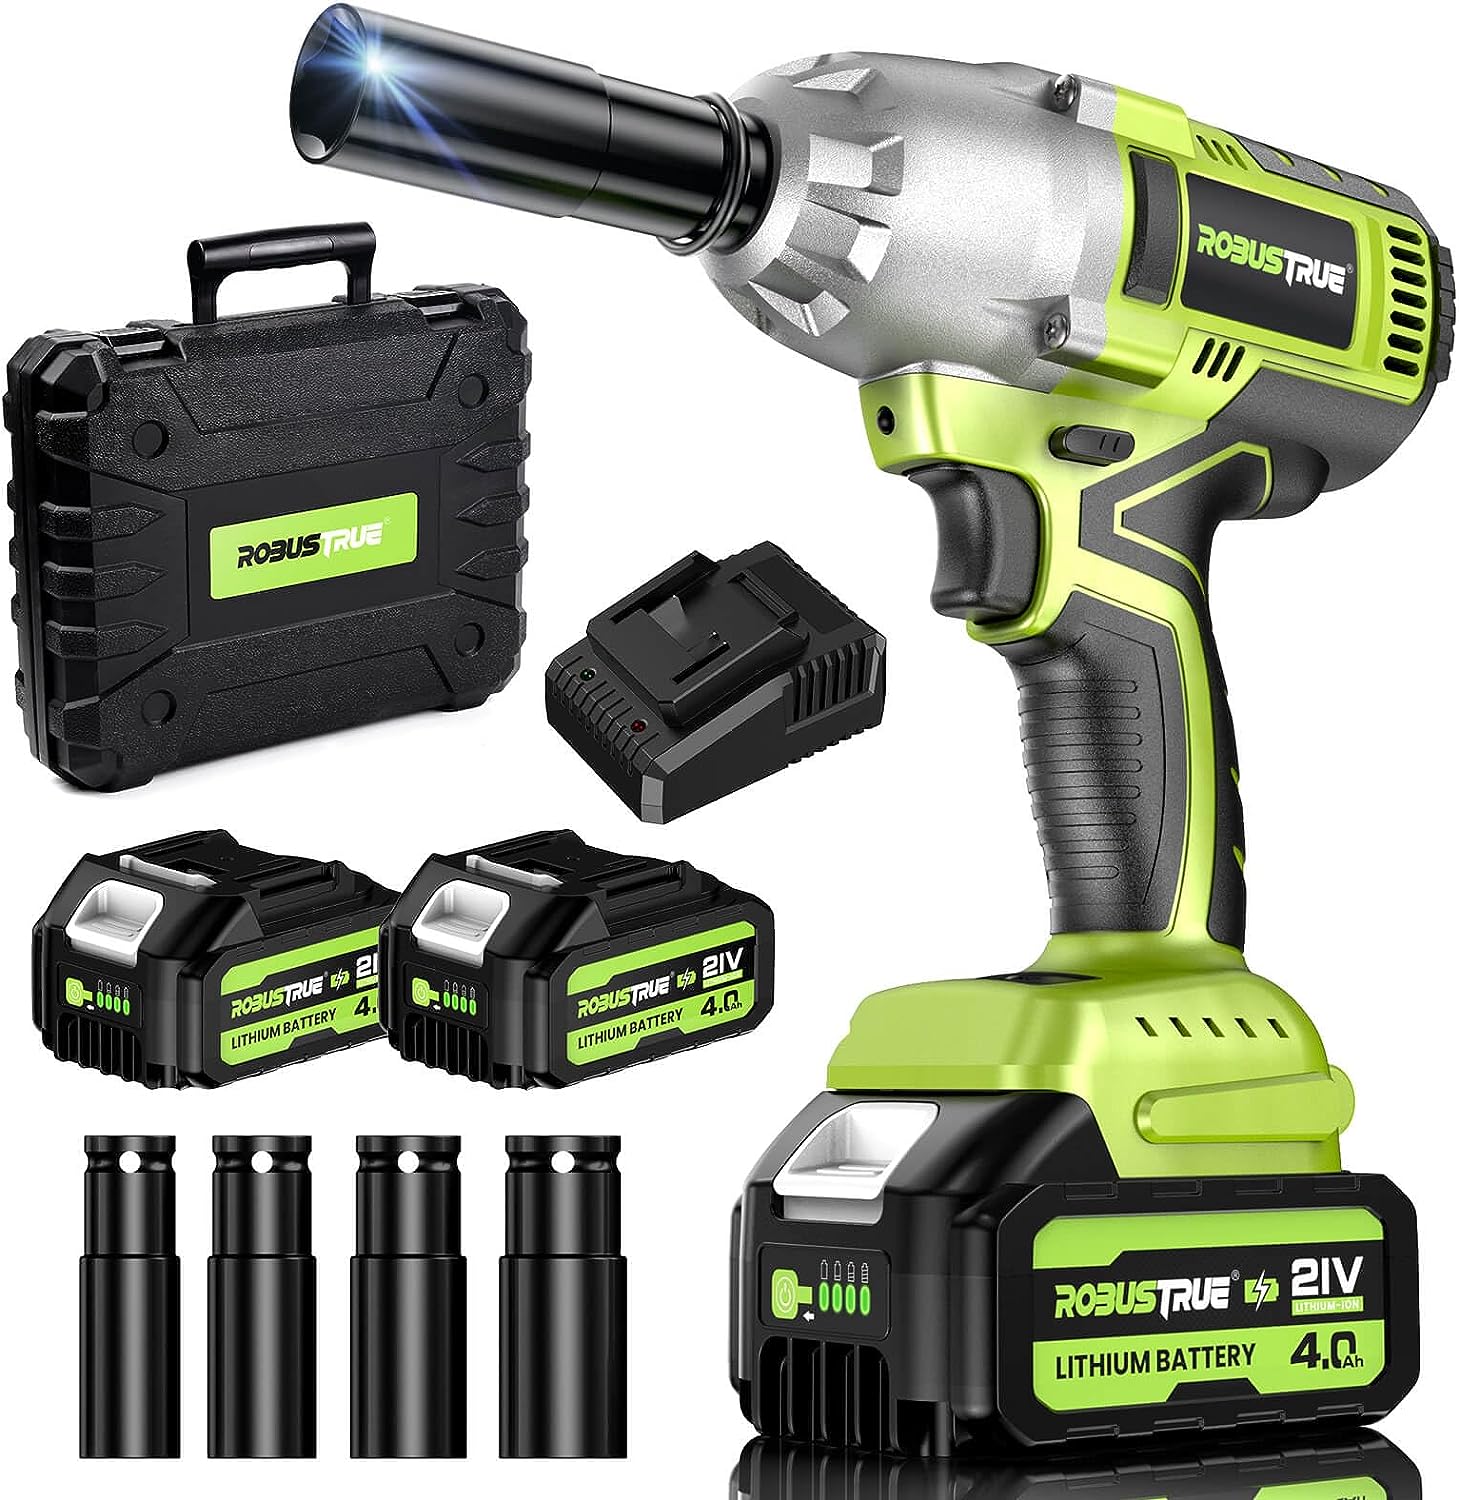 Robustrue Cordless Impact Wrench, 590Ft-lbs (800N.m) [...]